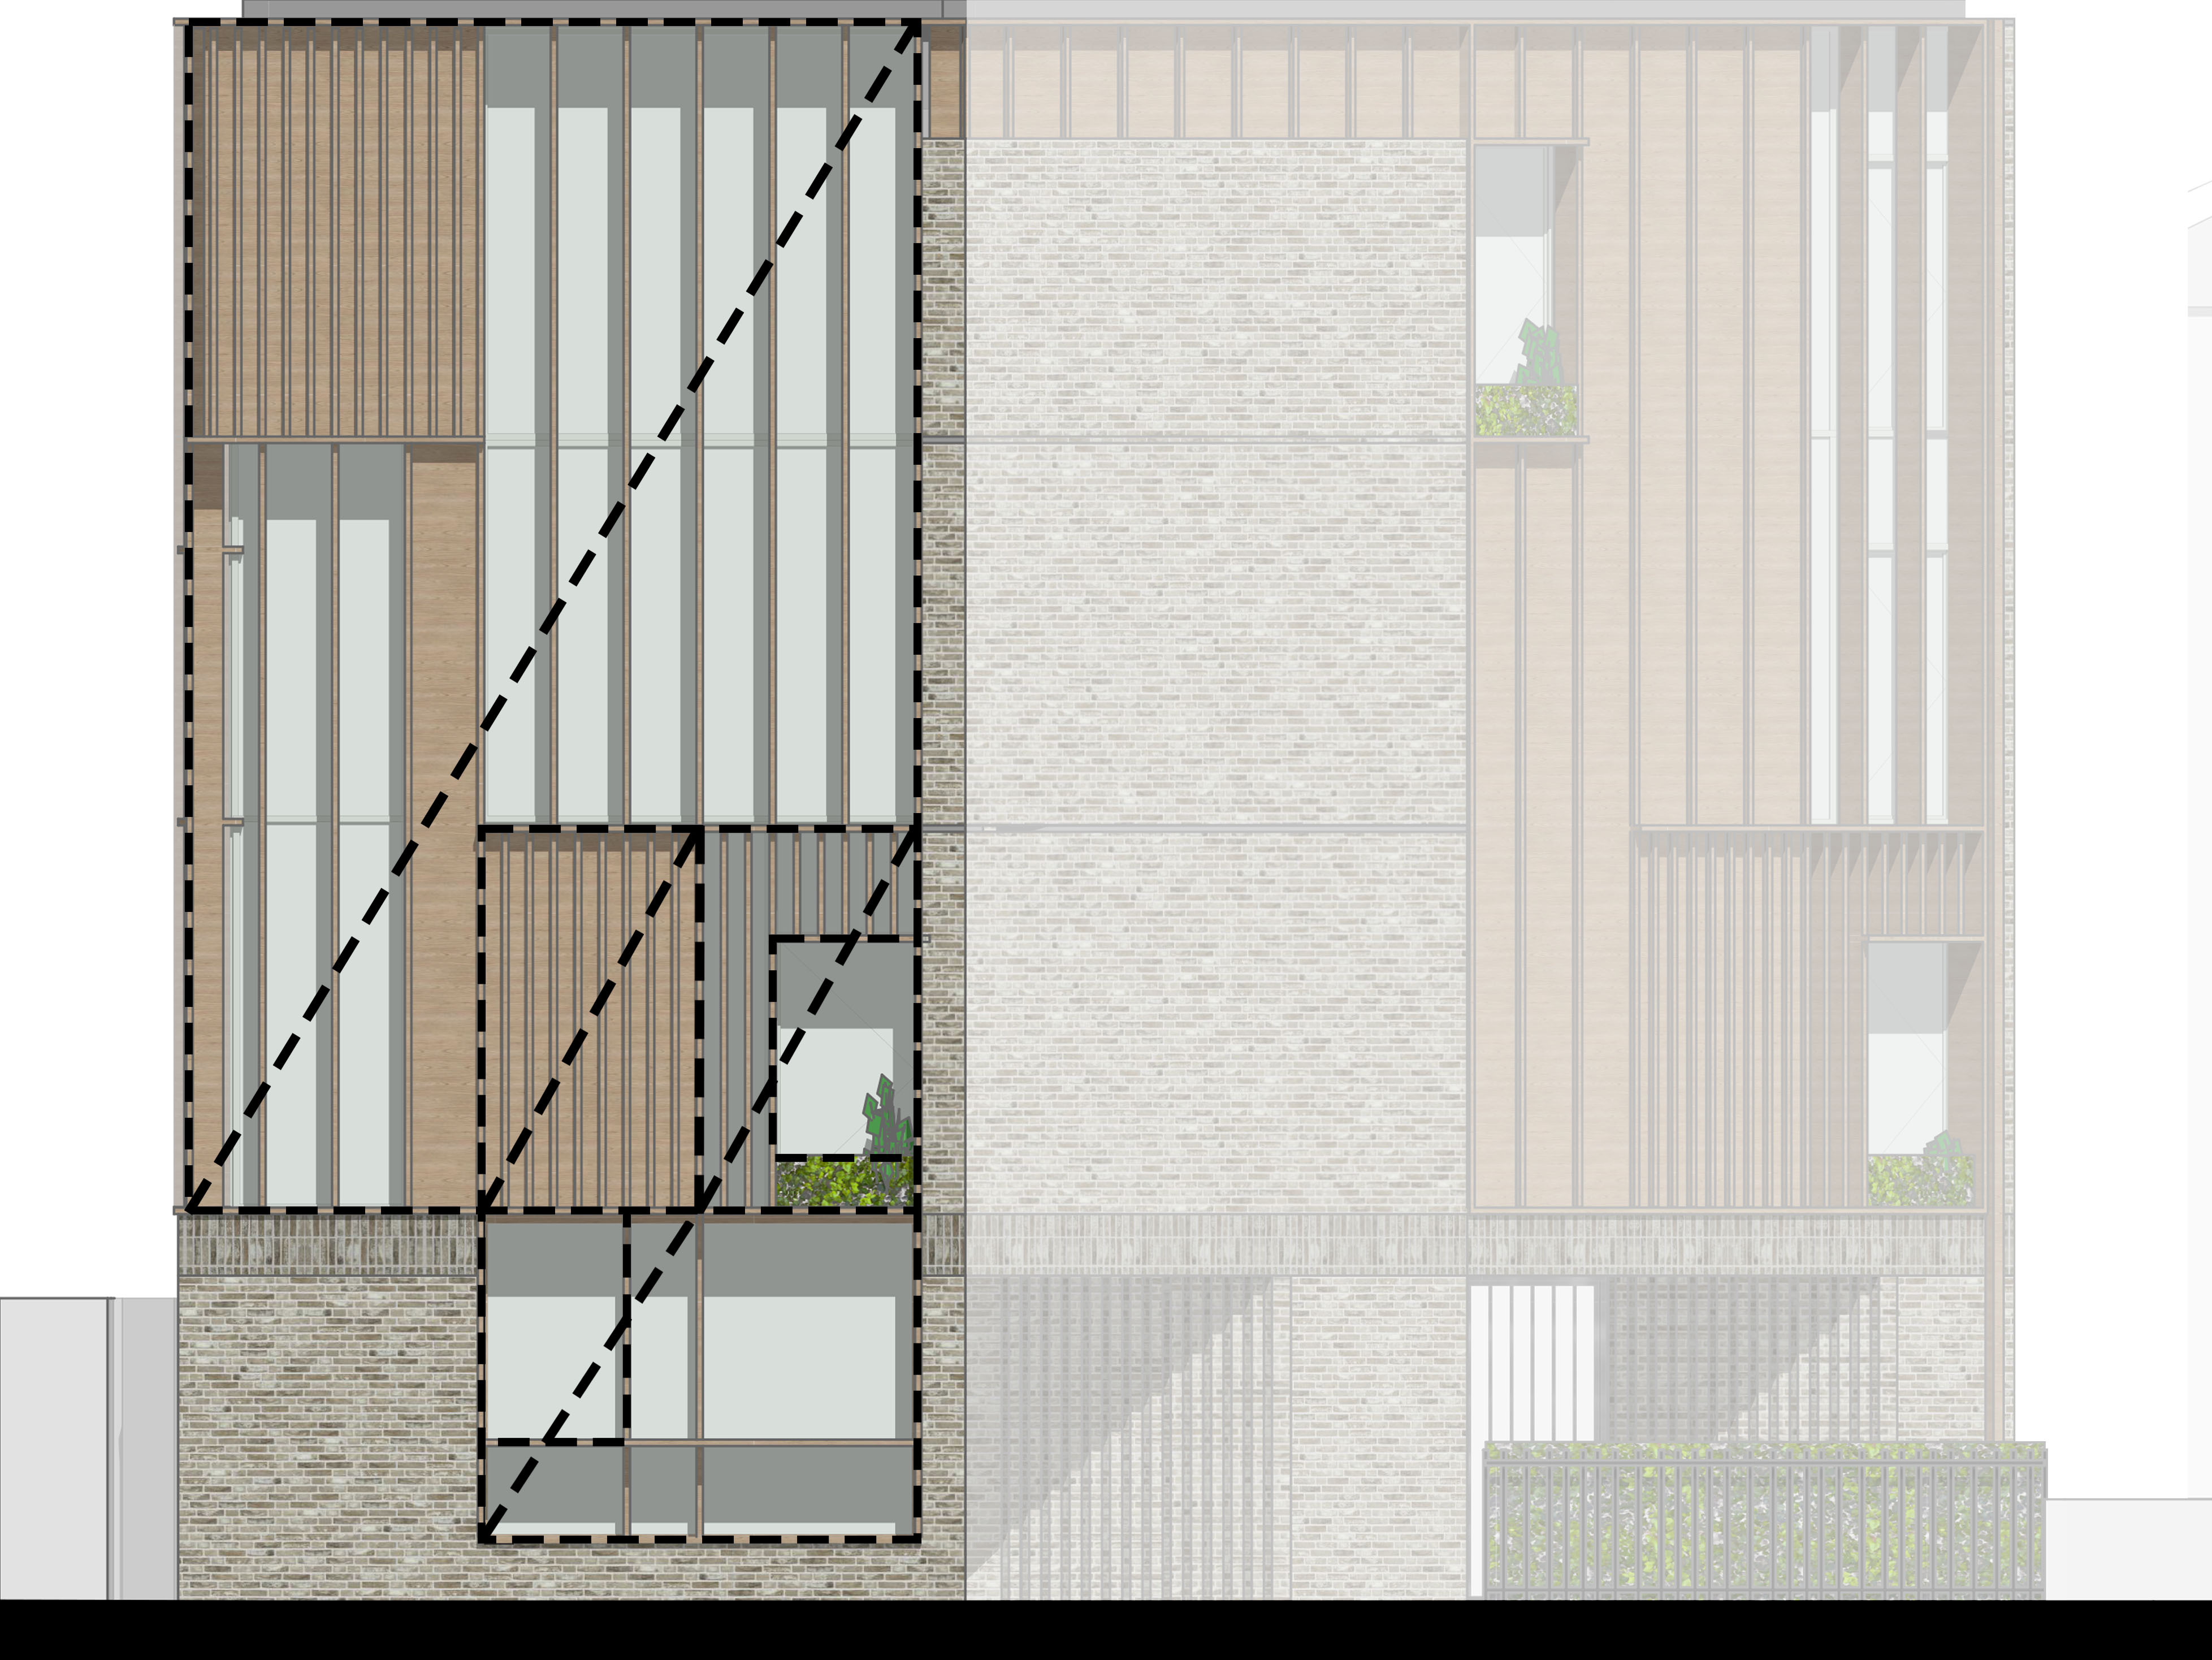 Elevation illustrating the ratio of glazing and materials on the facade newmarket road |  cambridge architects CDC Studio